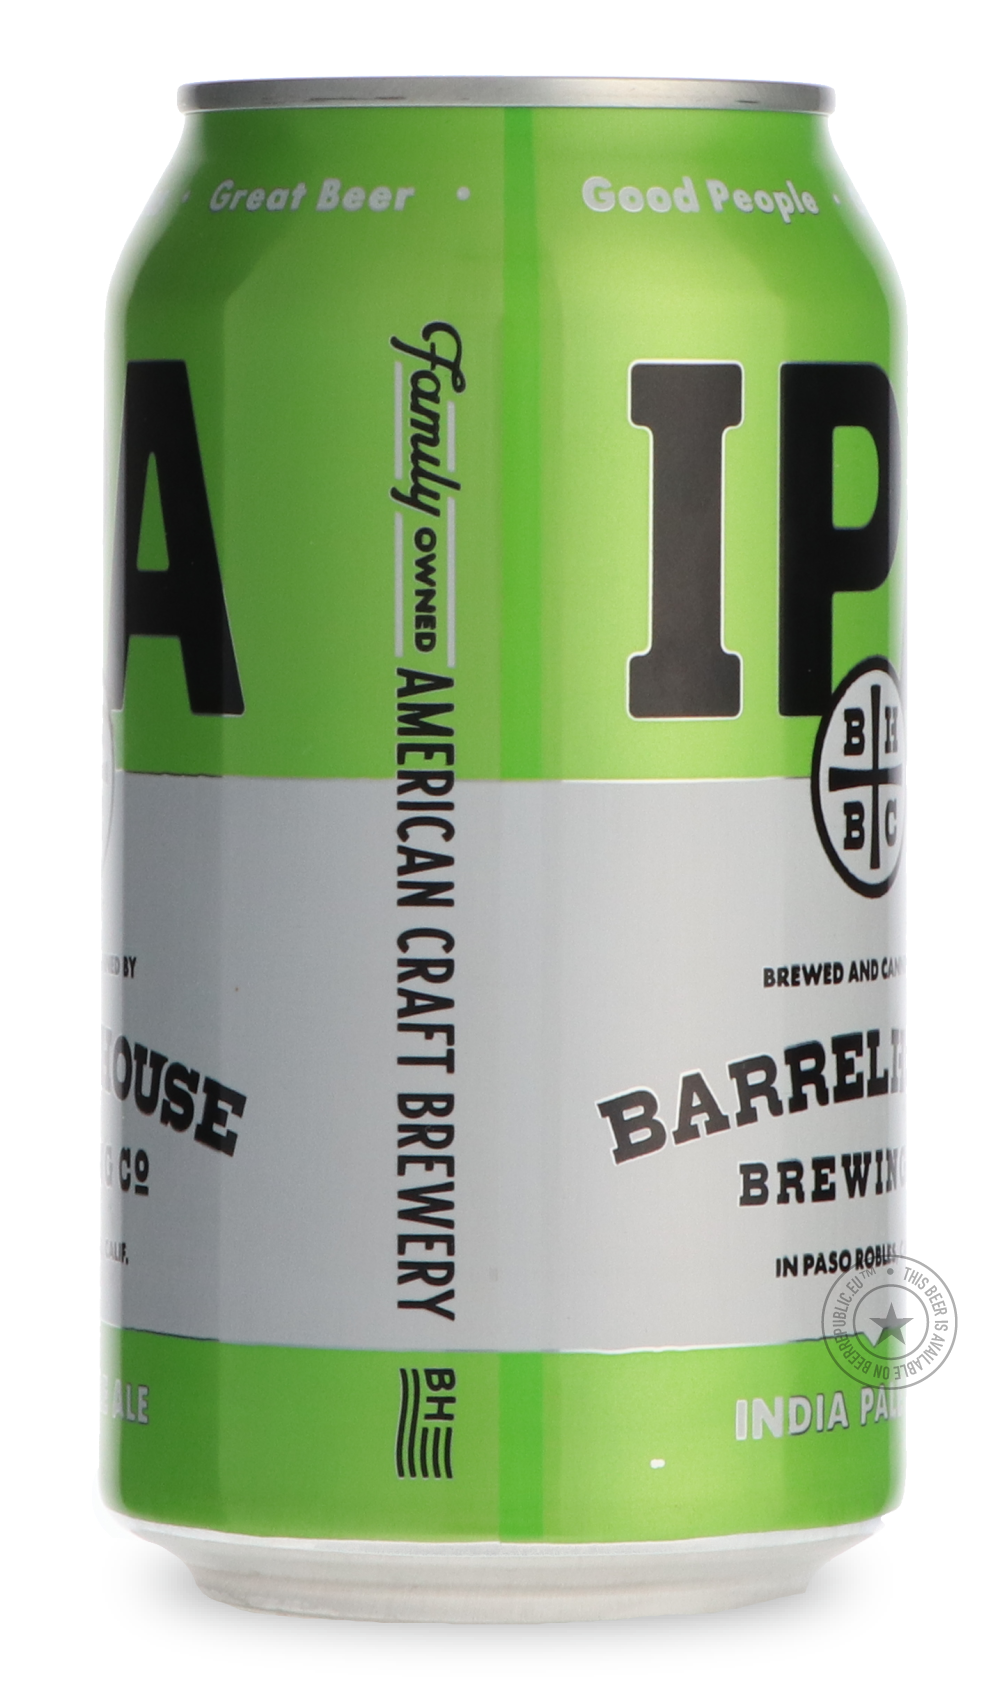 -BarrelHouse- Barrelhouse IPA-IPA- Only @ Beer Republic - The best online beer store for American & Canadian craft beer - Buy beer online from the USA and Canada - Bier online kopen - Amerikaans bier kopen - Craft beer store - Craft beer kopen - Amerikanisch bier kaufen - Bier online kaufen - Acheter biere online - IPA - Stout - Porter - New England IPA - Hazy IPA - Imperial Stout - Barrel Aged - Barrel Aged Imperial Stout - Brown - Dark beer - Blond - Blonde - Pilsner - Lager - Wheat - Weizen - Amber - Bar